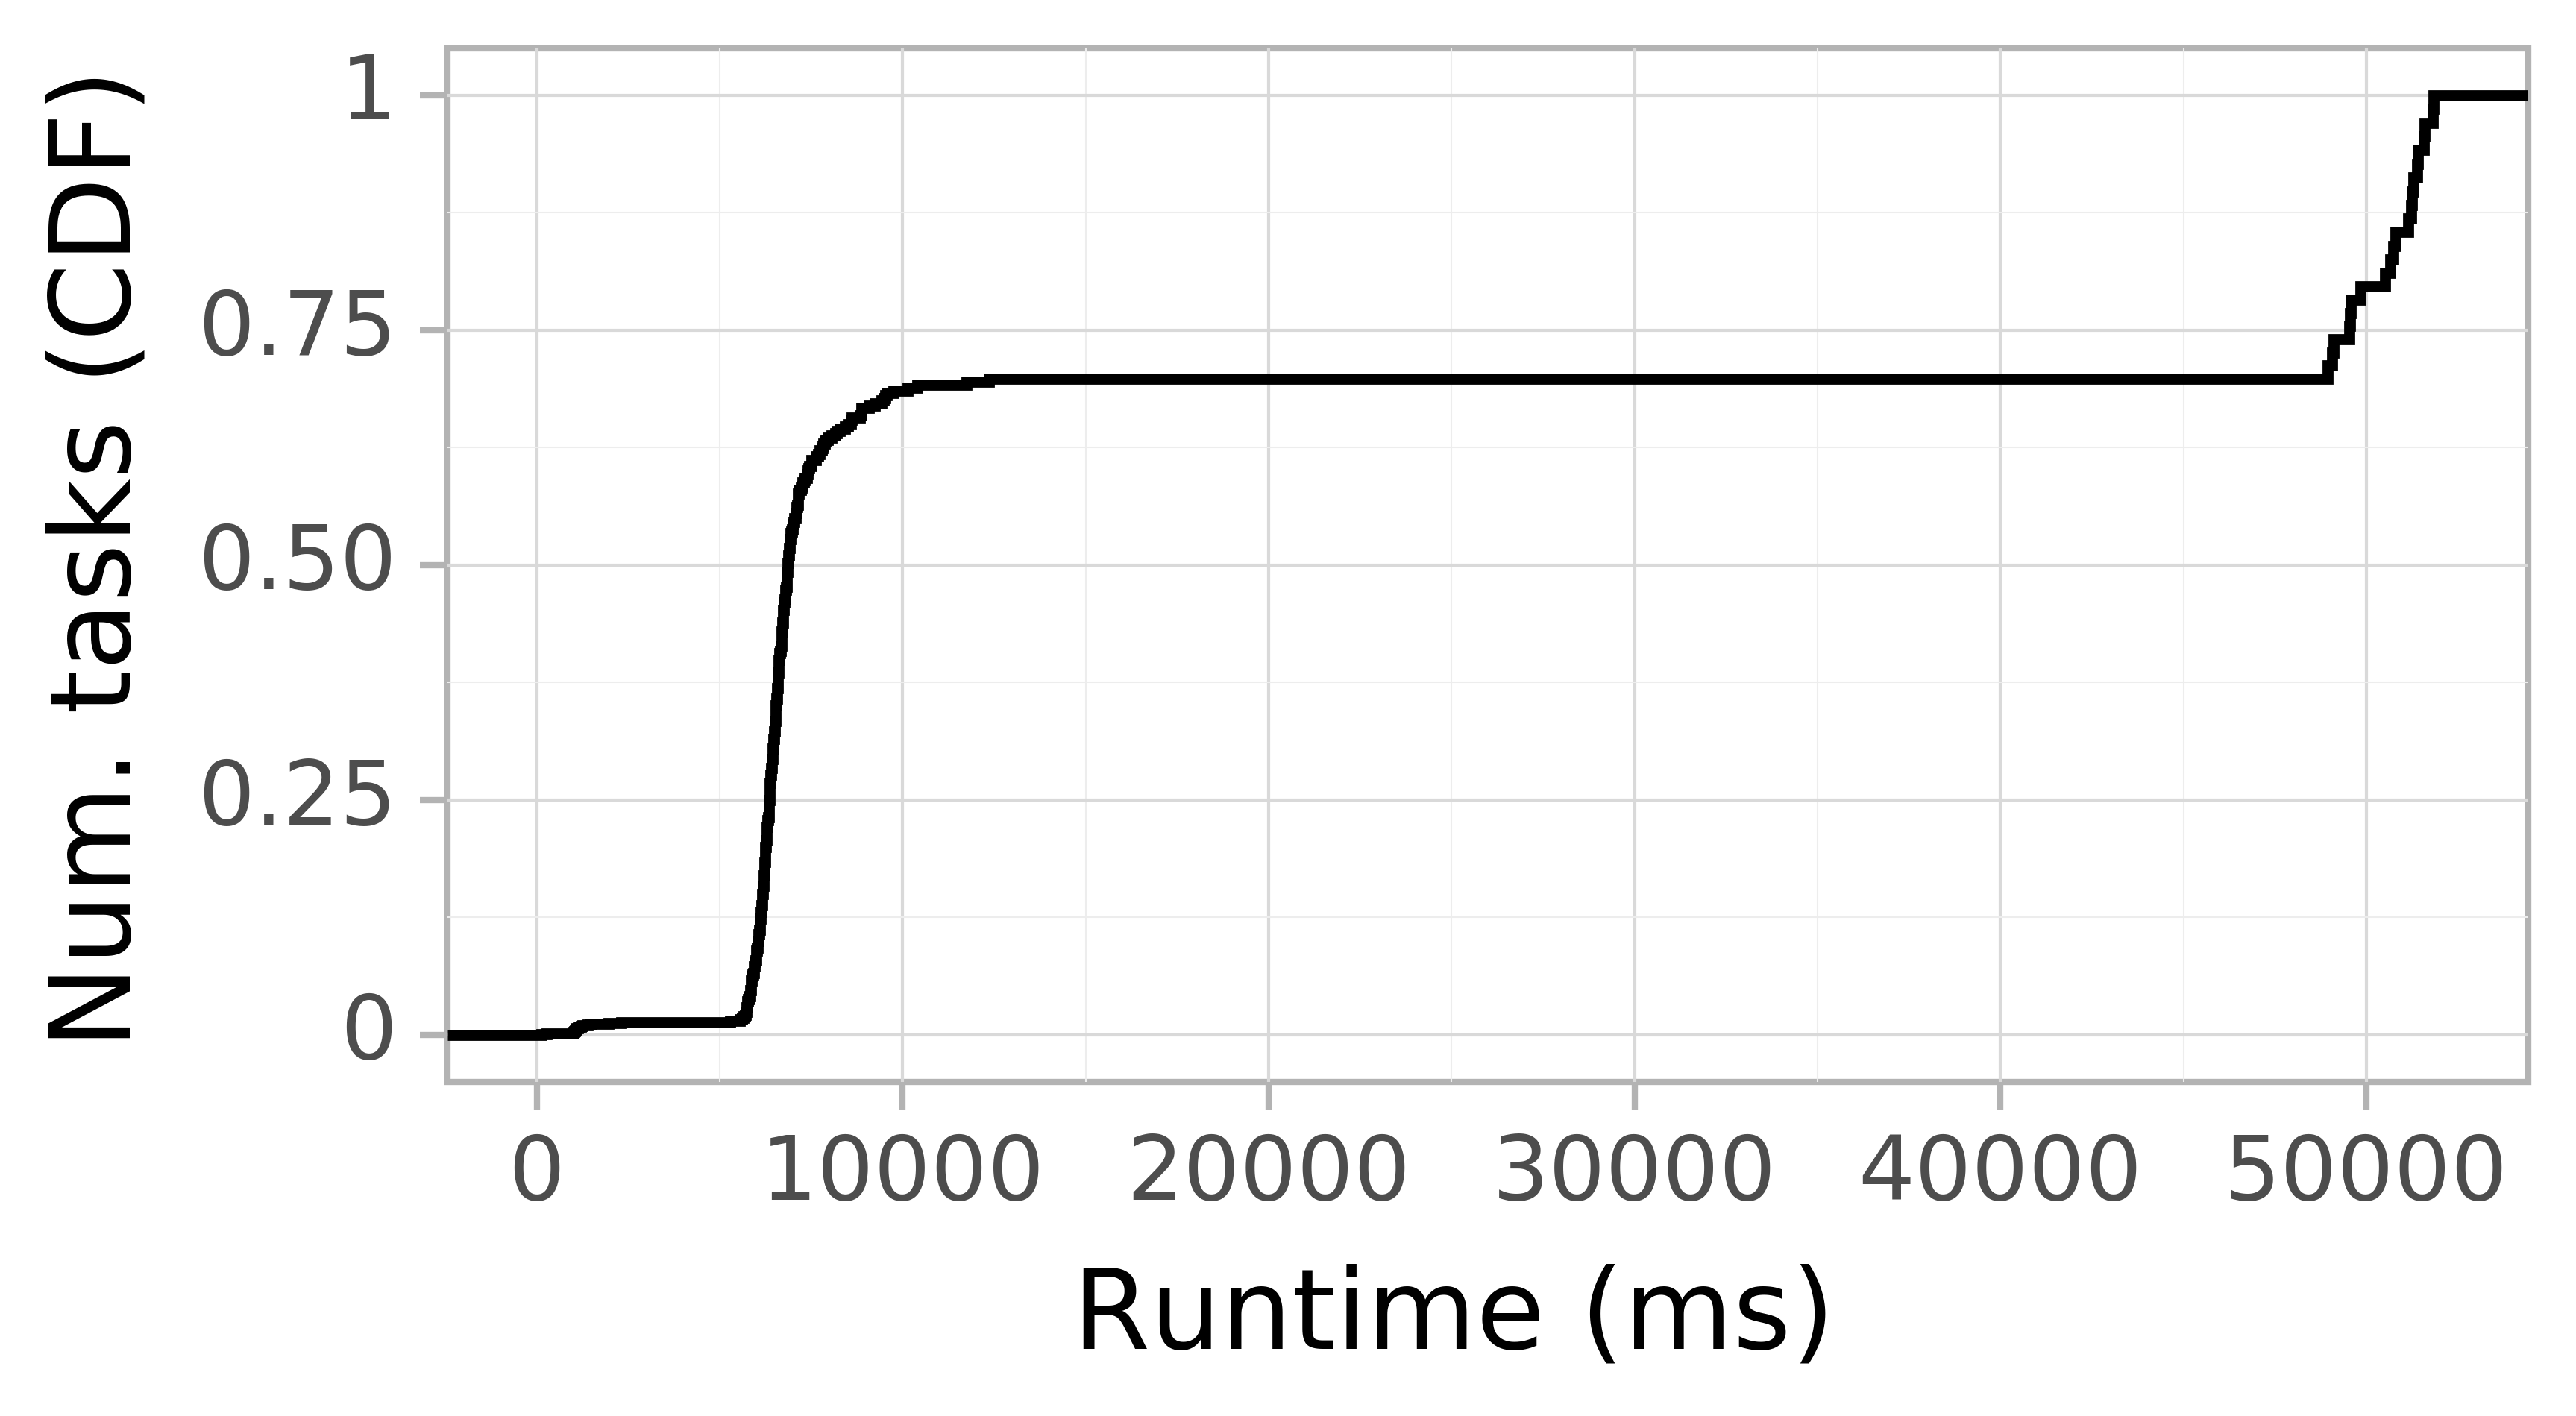 Task runtime CDF graph for the askalon-new_ee61 trace.